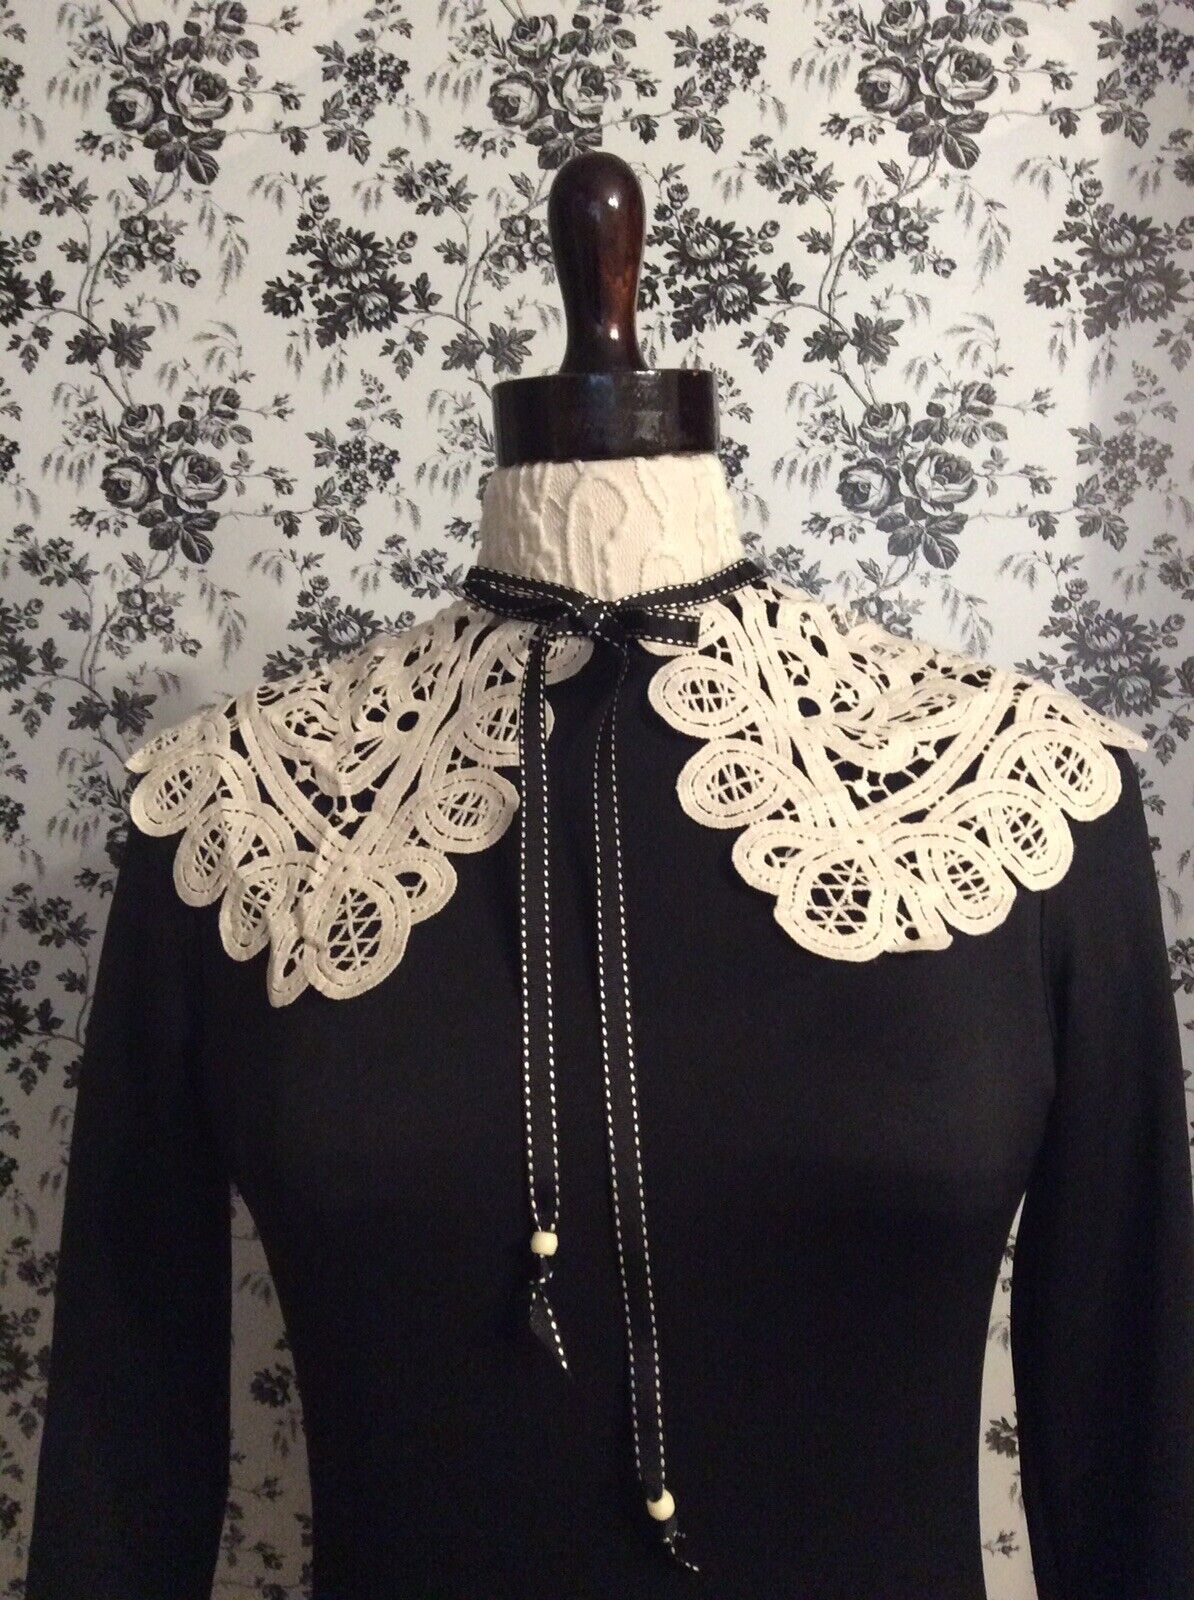 Lovely Top Stitched Lace Collar Removable Cream Color Vintage Style